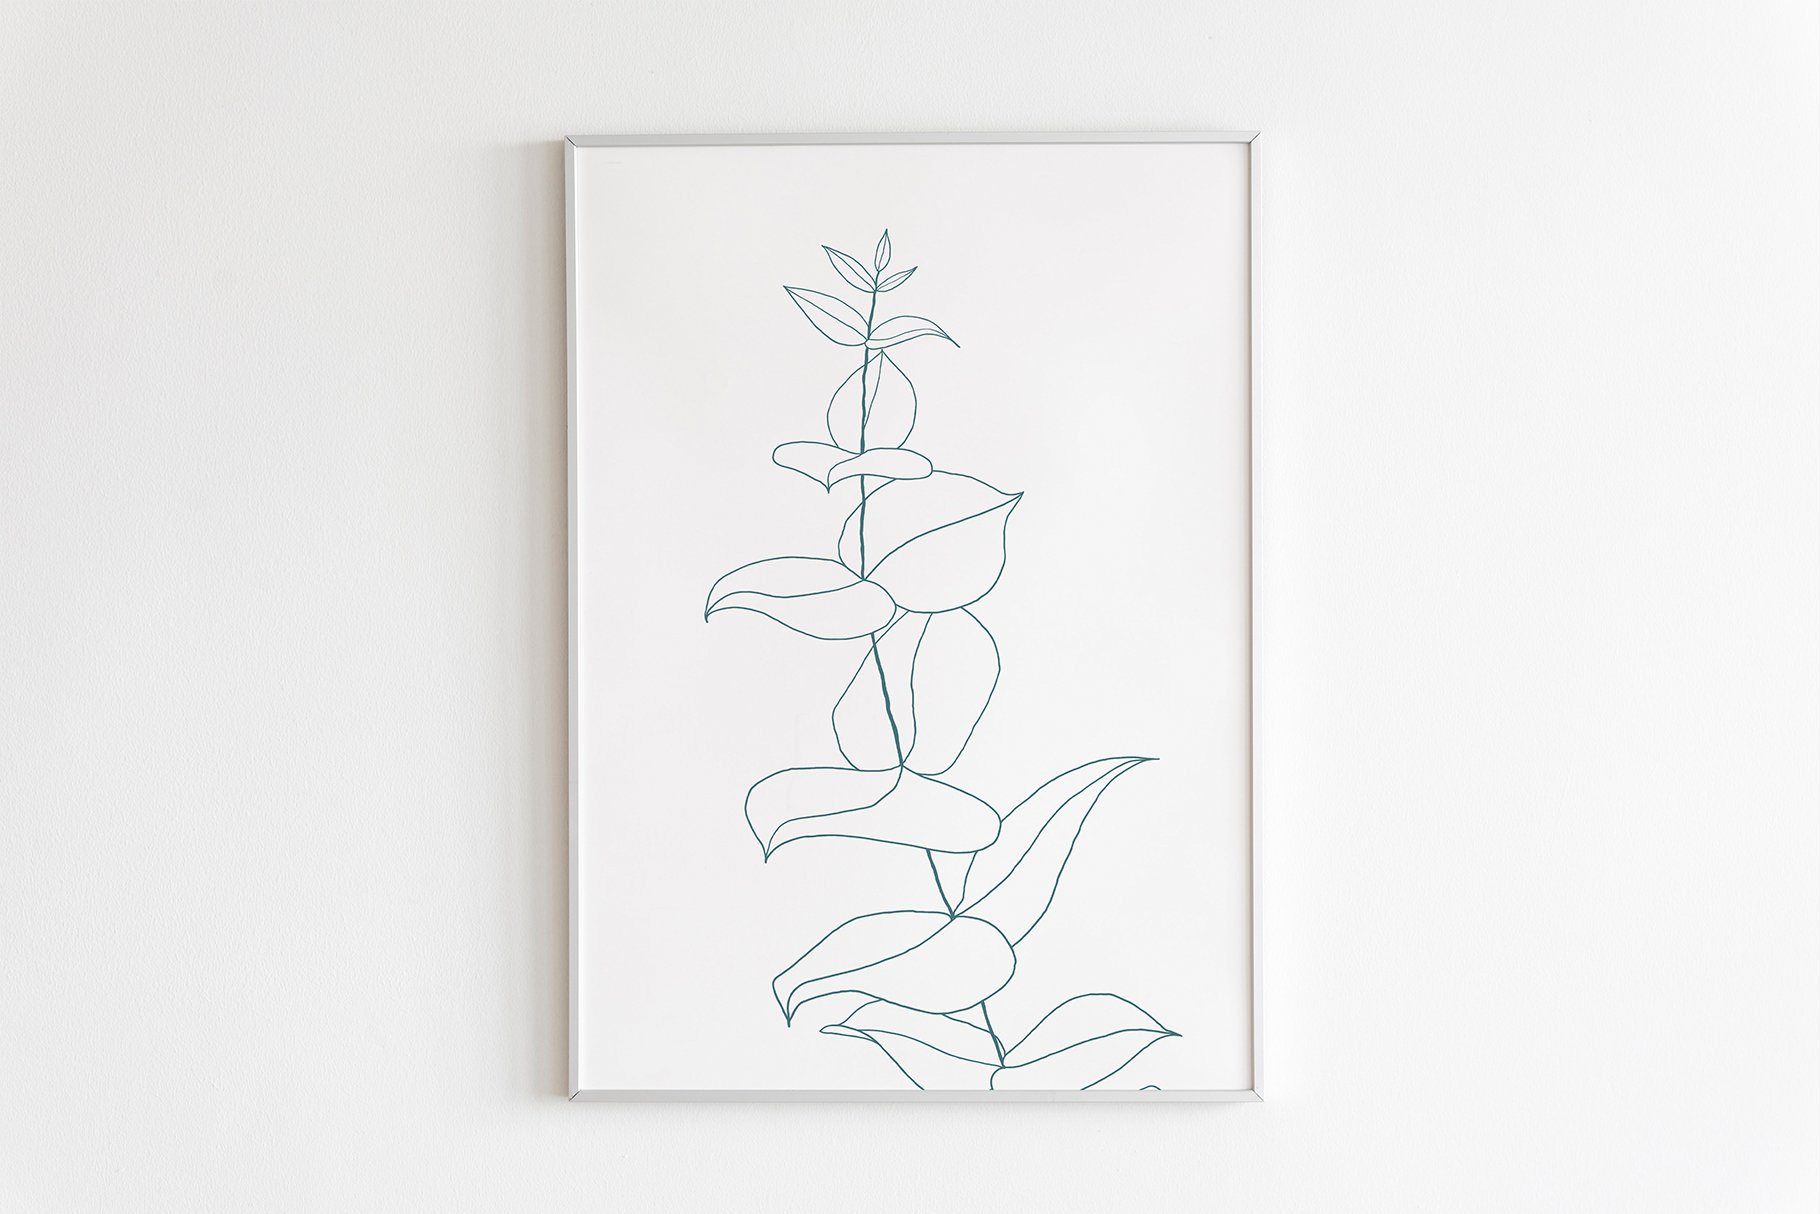 Drawing of a plant on a white wall.